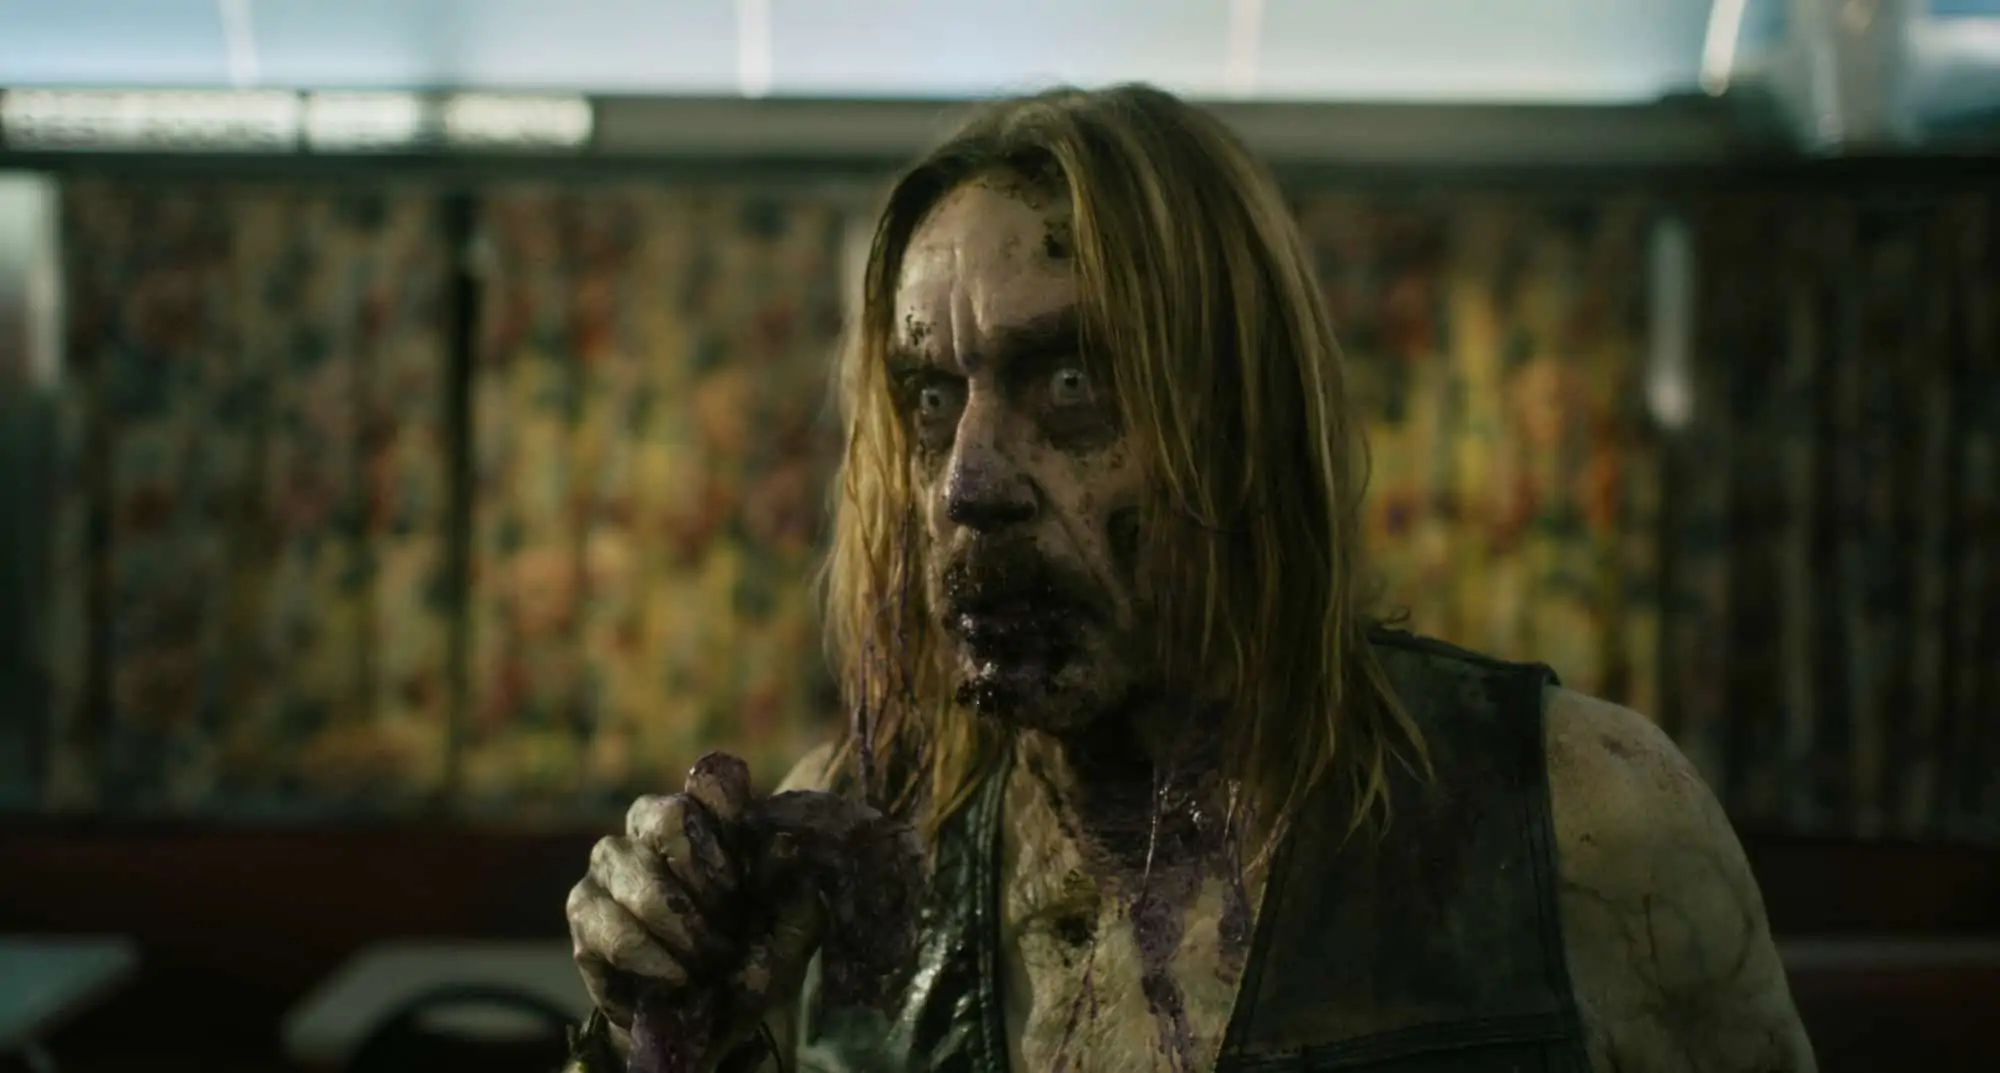 Iggy Pop stars as "Male Coffee Zombie" in writer/director Jim Jarmusch's THE DEAD DON'T DIE, a Focus Features release.  Credit : Frederick Elmes / Focus Features  © 2019 Image Eleven Productions, Inc.